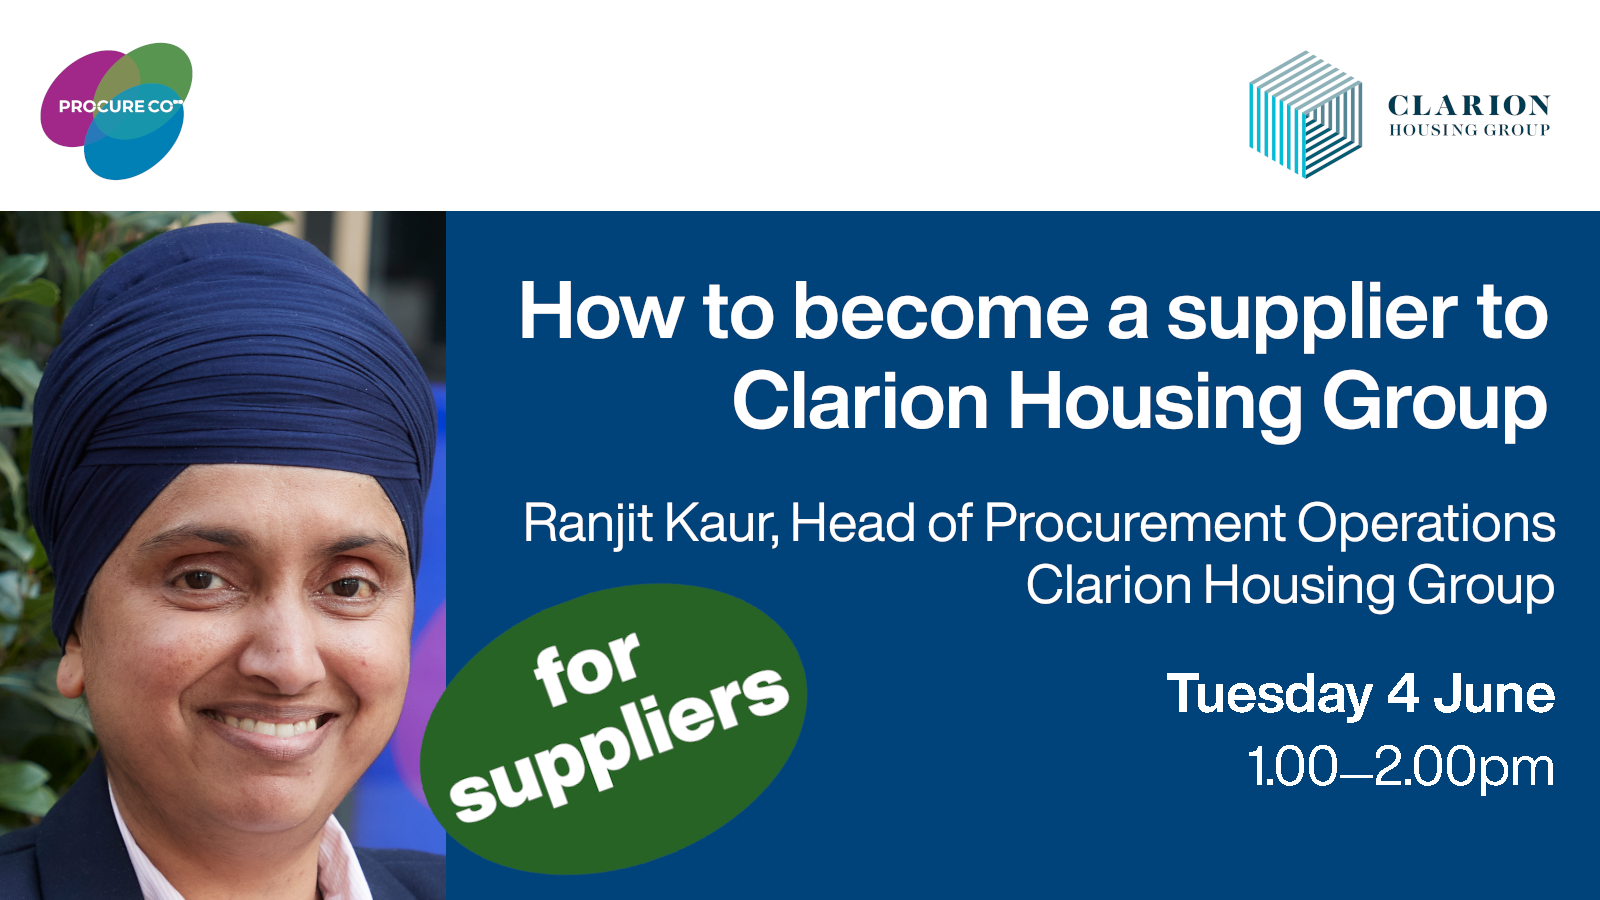 Ranjit Kaur on 'How to become a supplier to Clarion Housing Group'